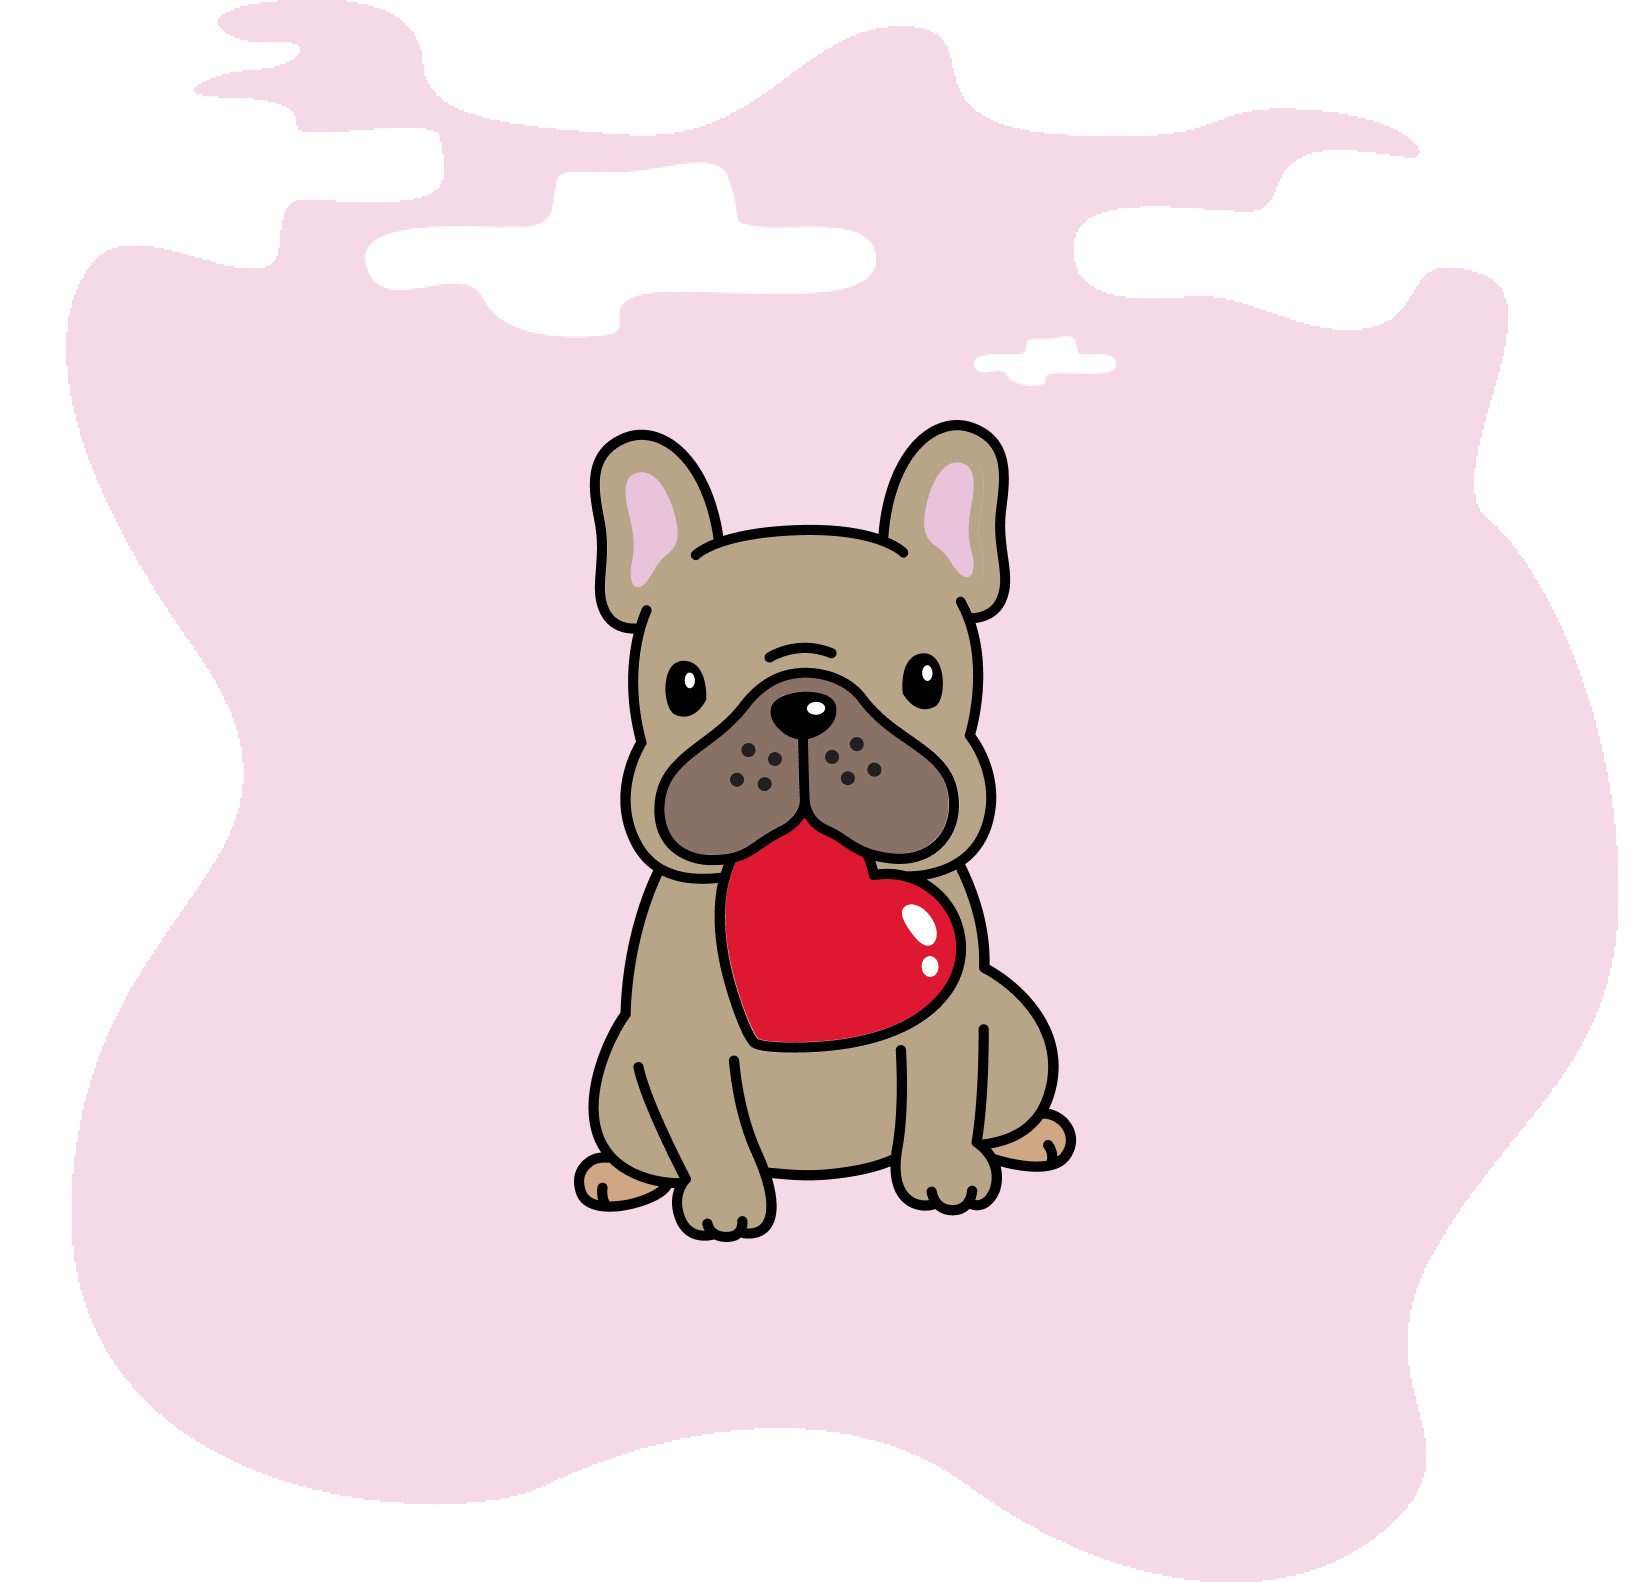 A cartoon puppy holding a heart in its mouth.